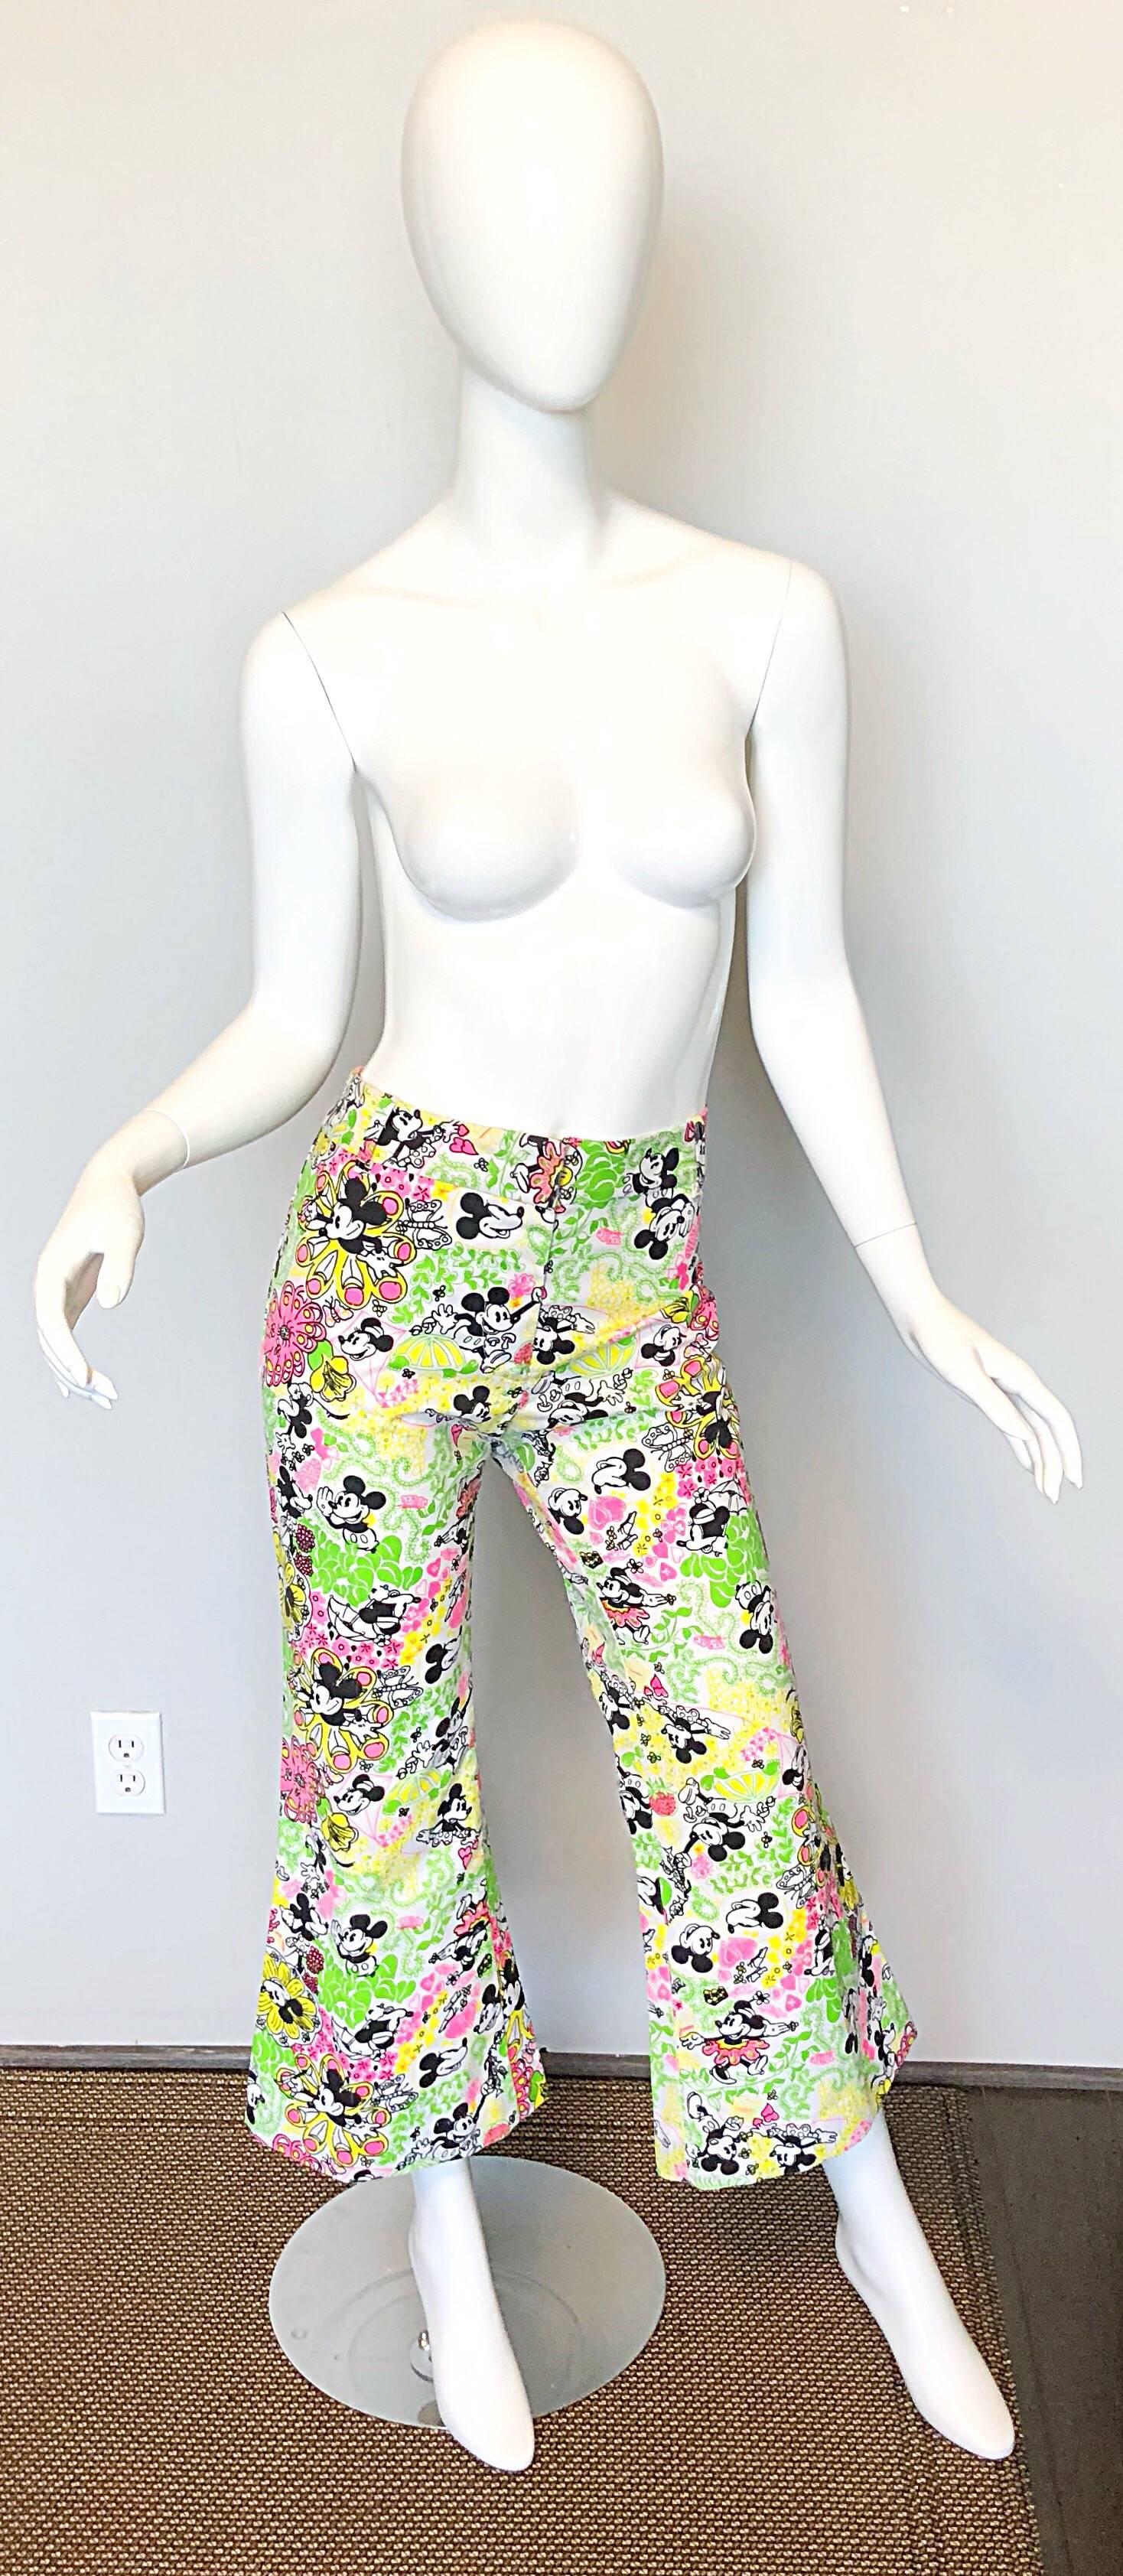 Rare musuem quality 70s LILLY PULITZER 'THE LILLY'
Mickey and Minnie Mouse / Disney high waisted unisex cotton bell bottom pants! A pair of shorts in the same print recently sold online for over $16,000! Wonderful form fitting silhouette with a